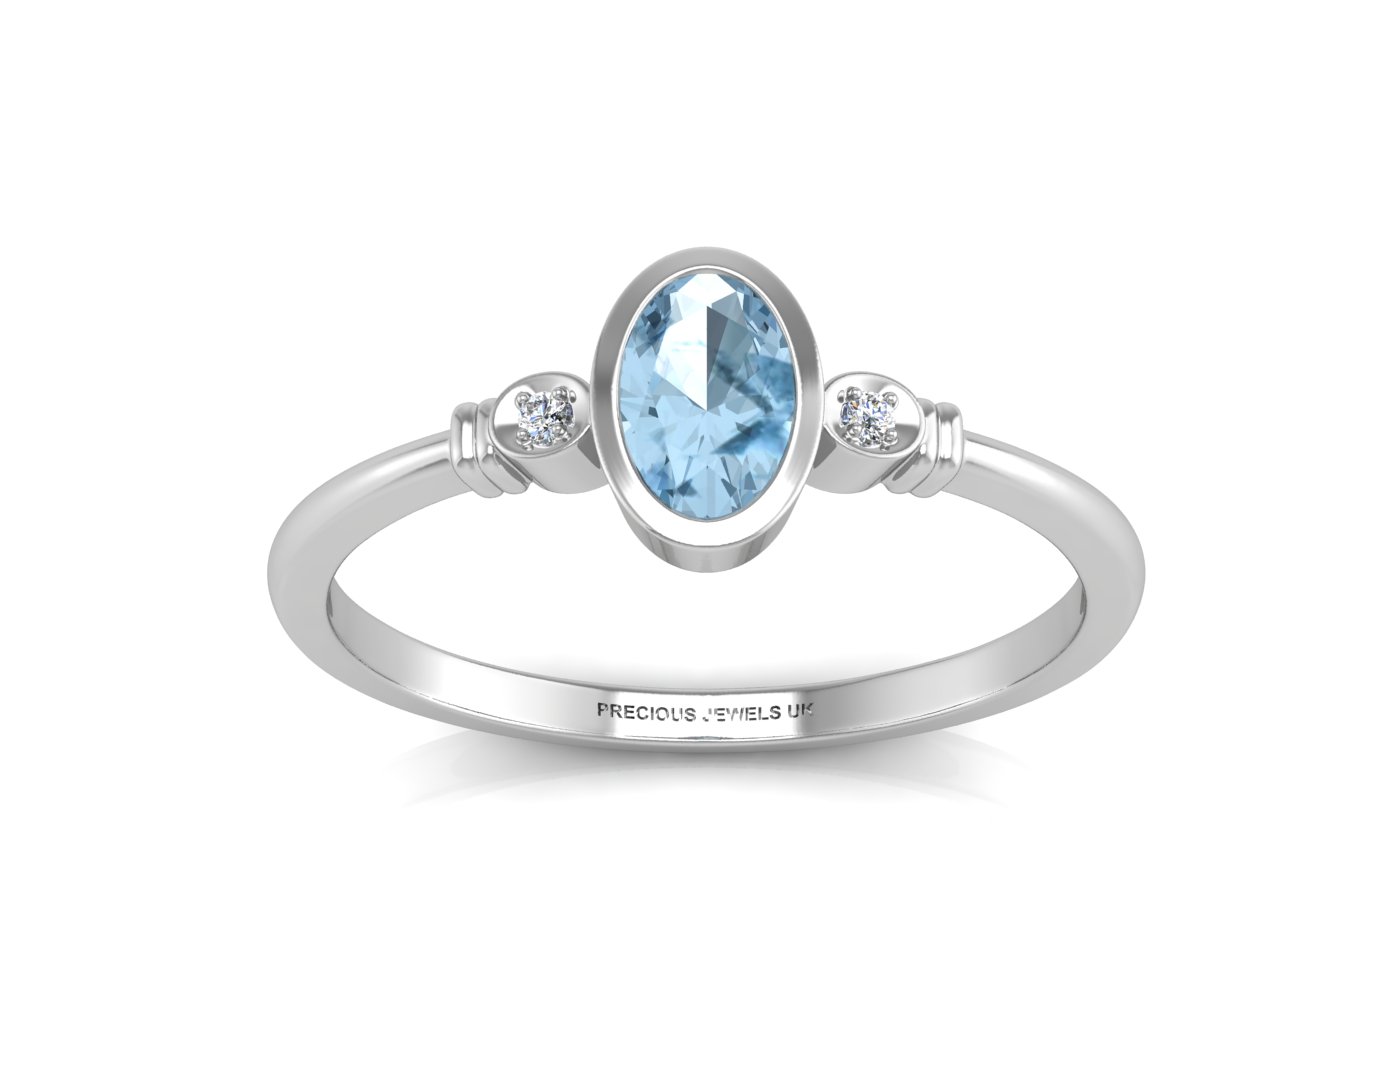 9ct White Gold Diamond And Oval Shape Blue Topaz Ring - Image 3 of 5